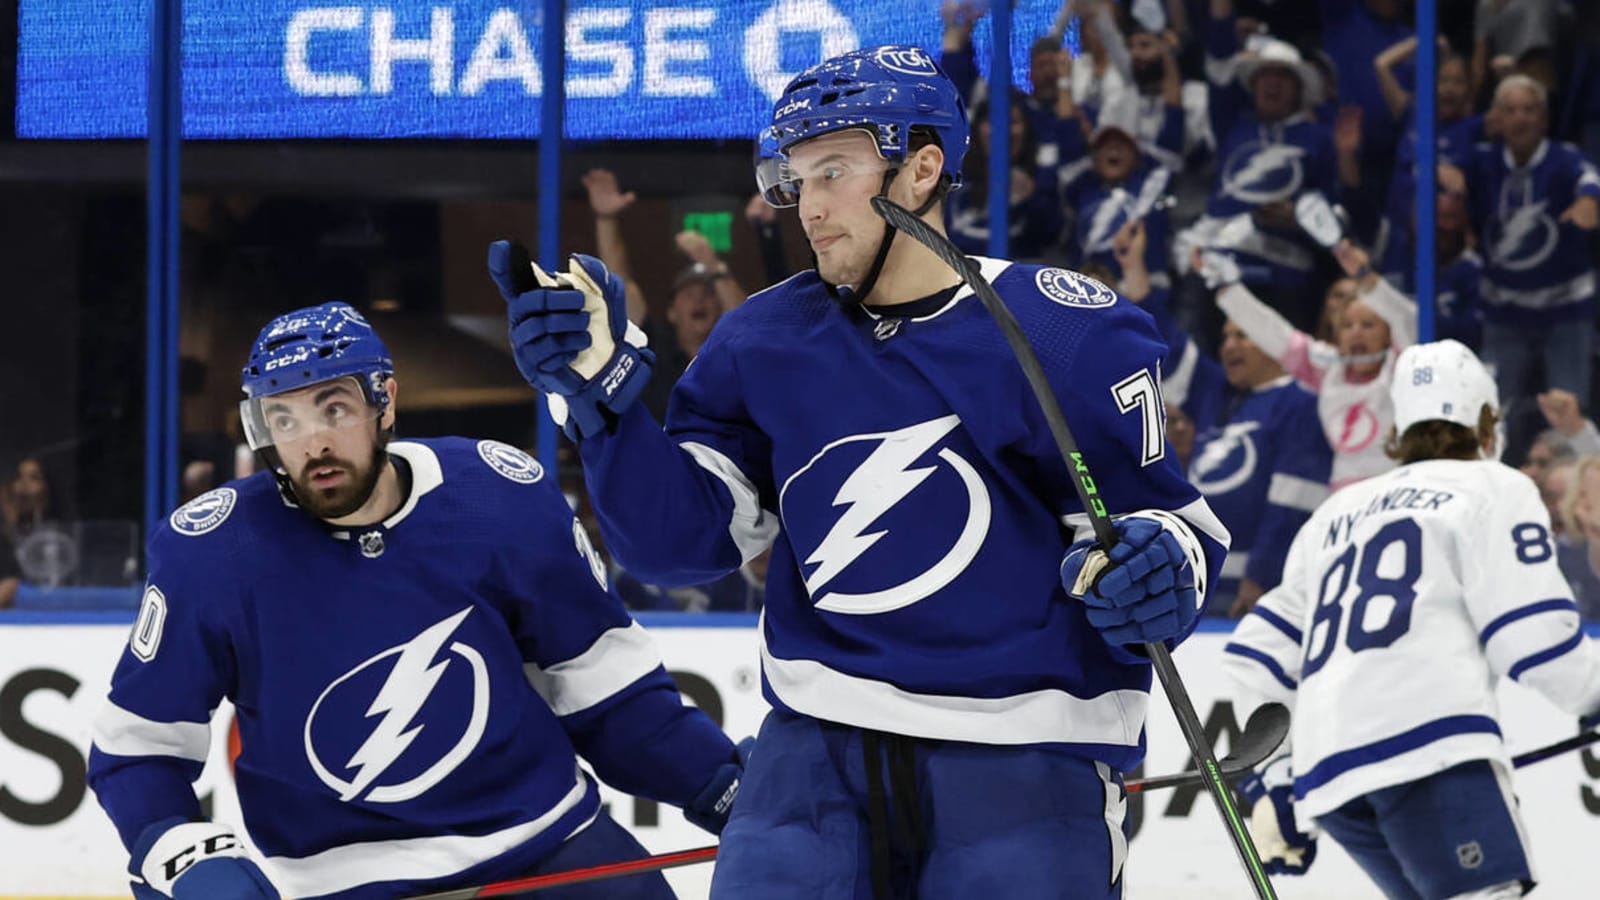 Lightning rout Maple Leafs 7-3, even series 2-2